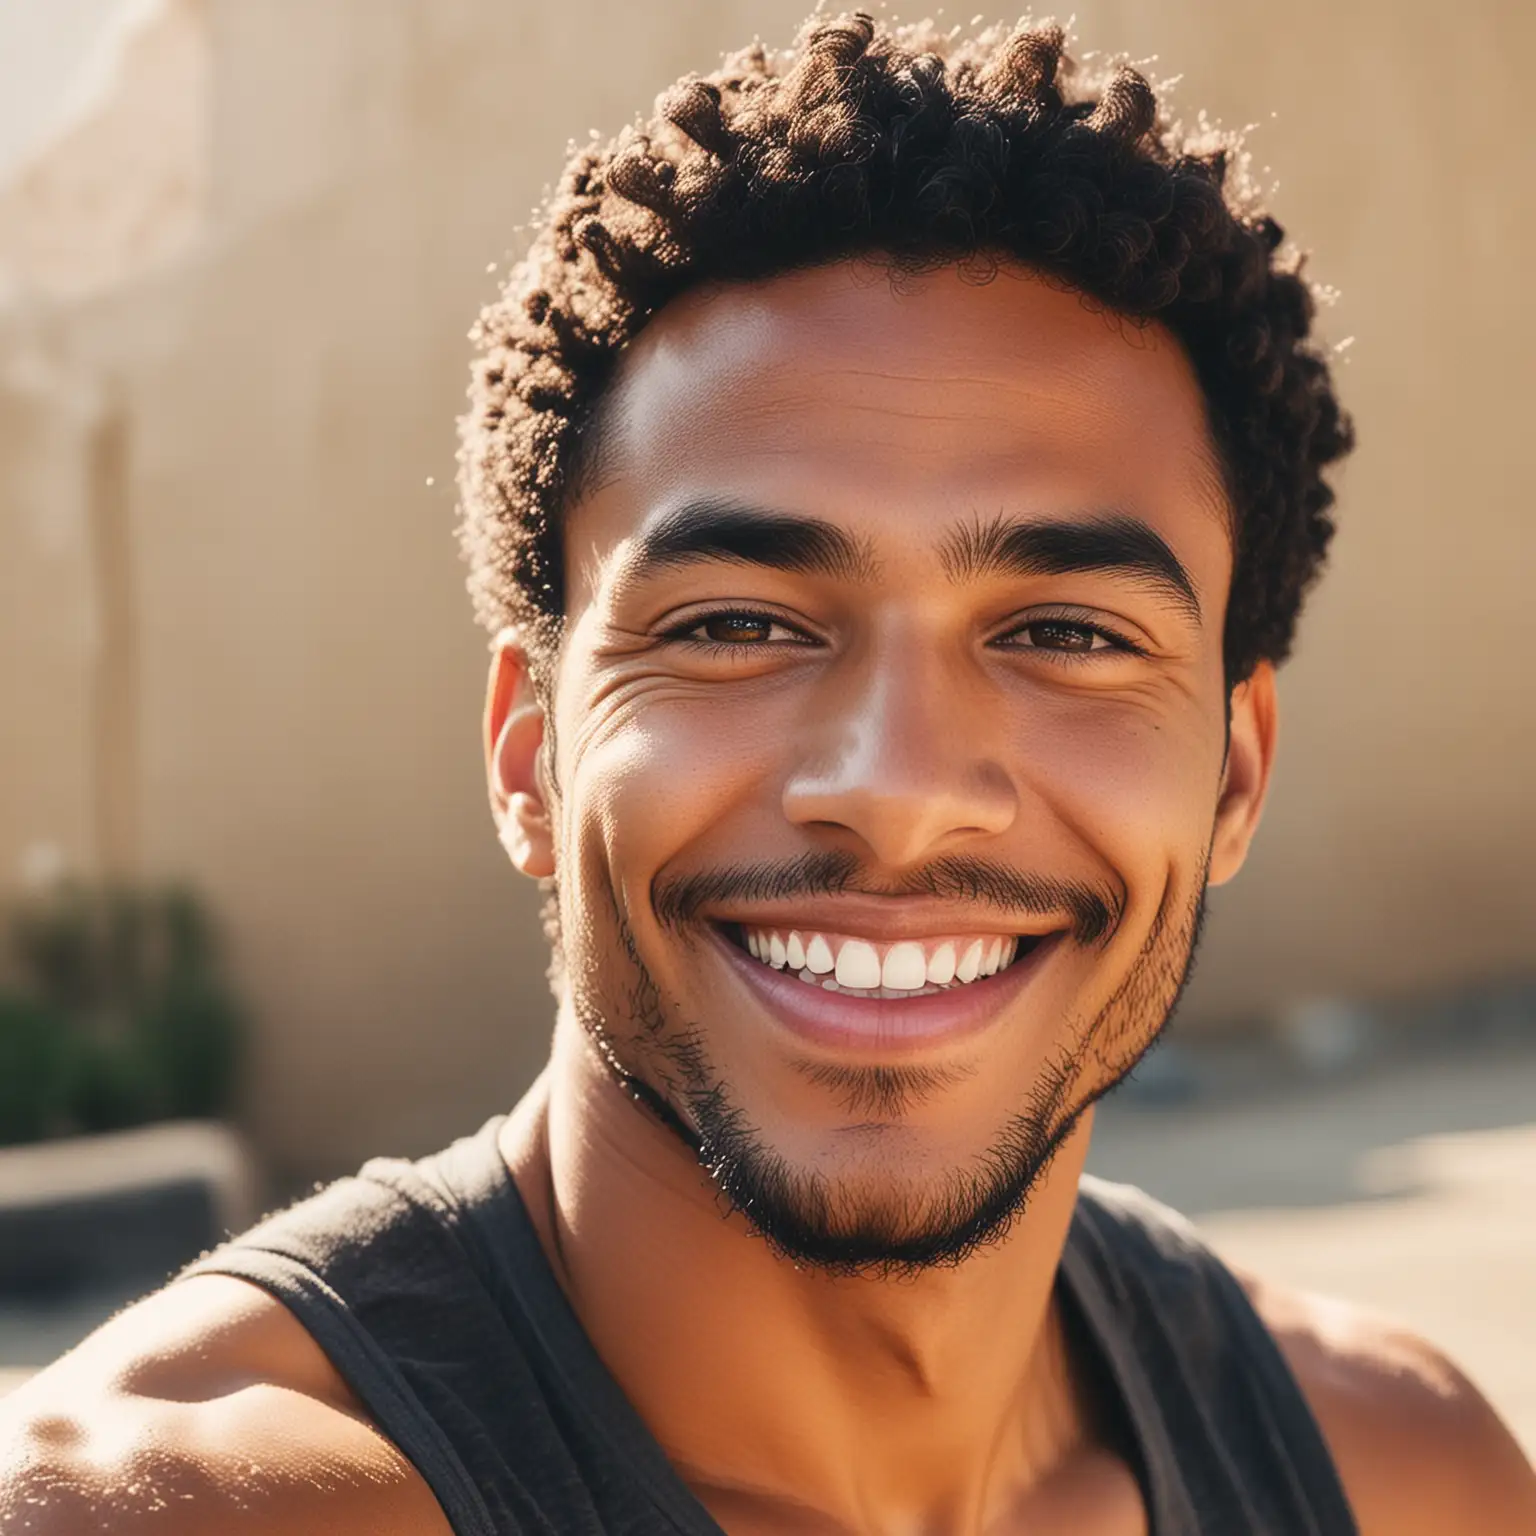 multiracial, close up instagram profile pic, male, smile, lumbarjack, view of background

